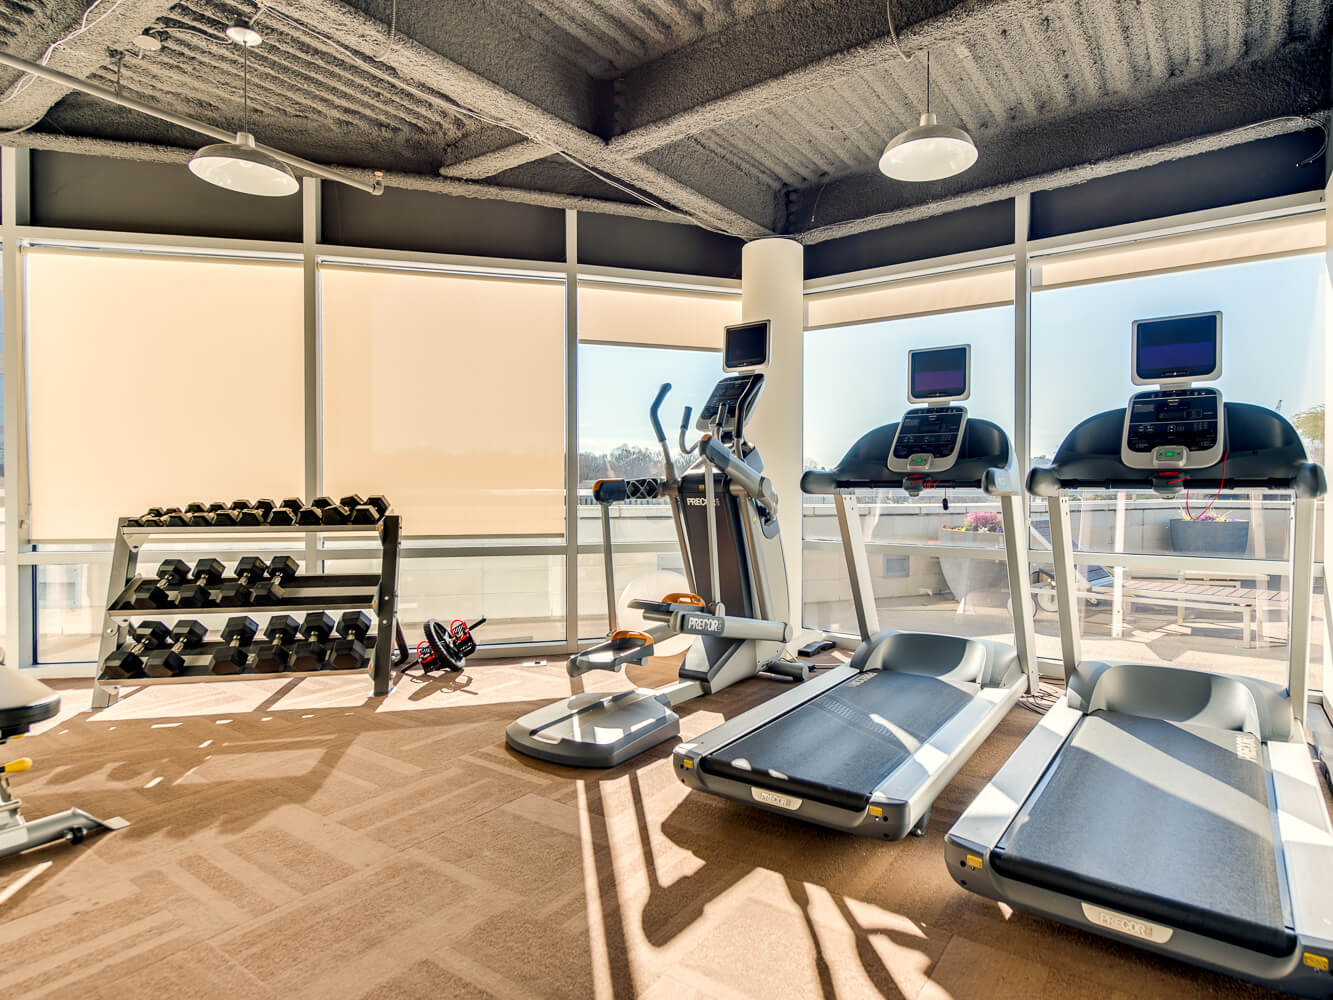 Exercise Room adjacent to the pool